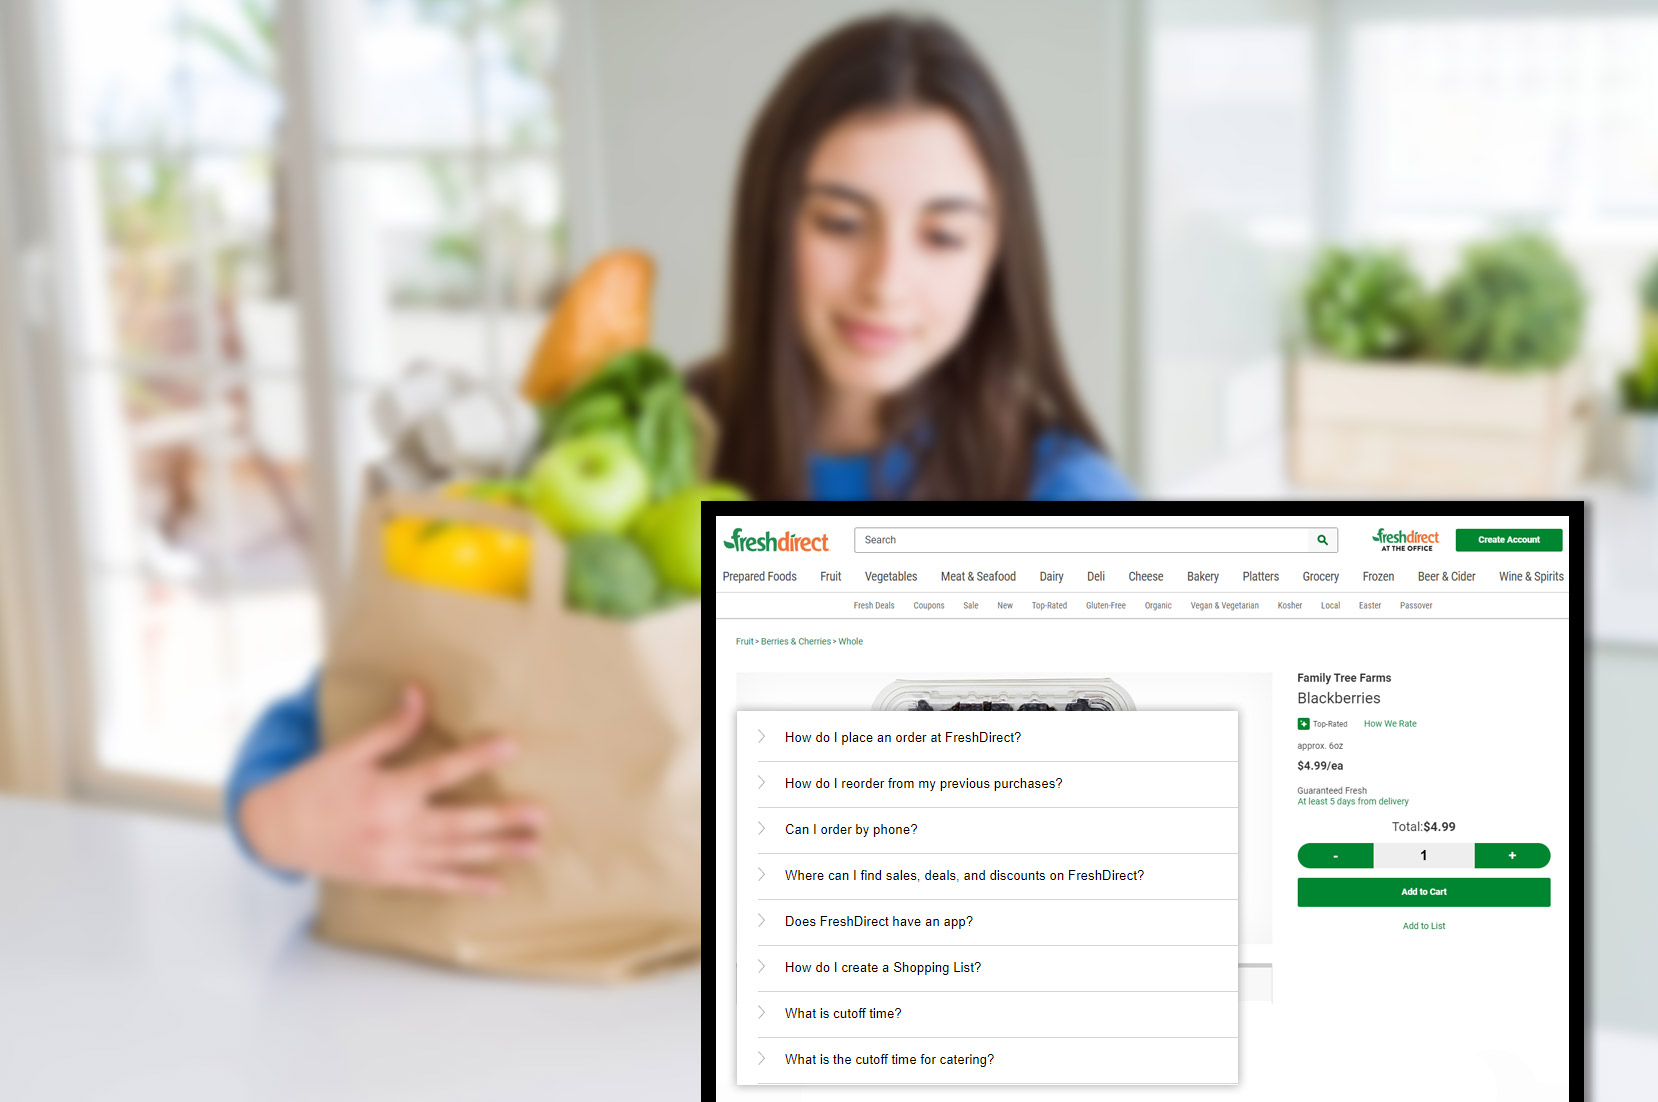 freshdirect-comproduct-questions-answers-extraction-services